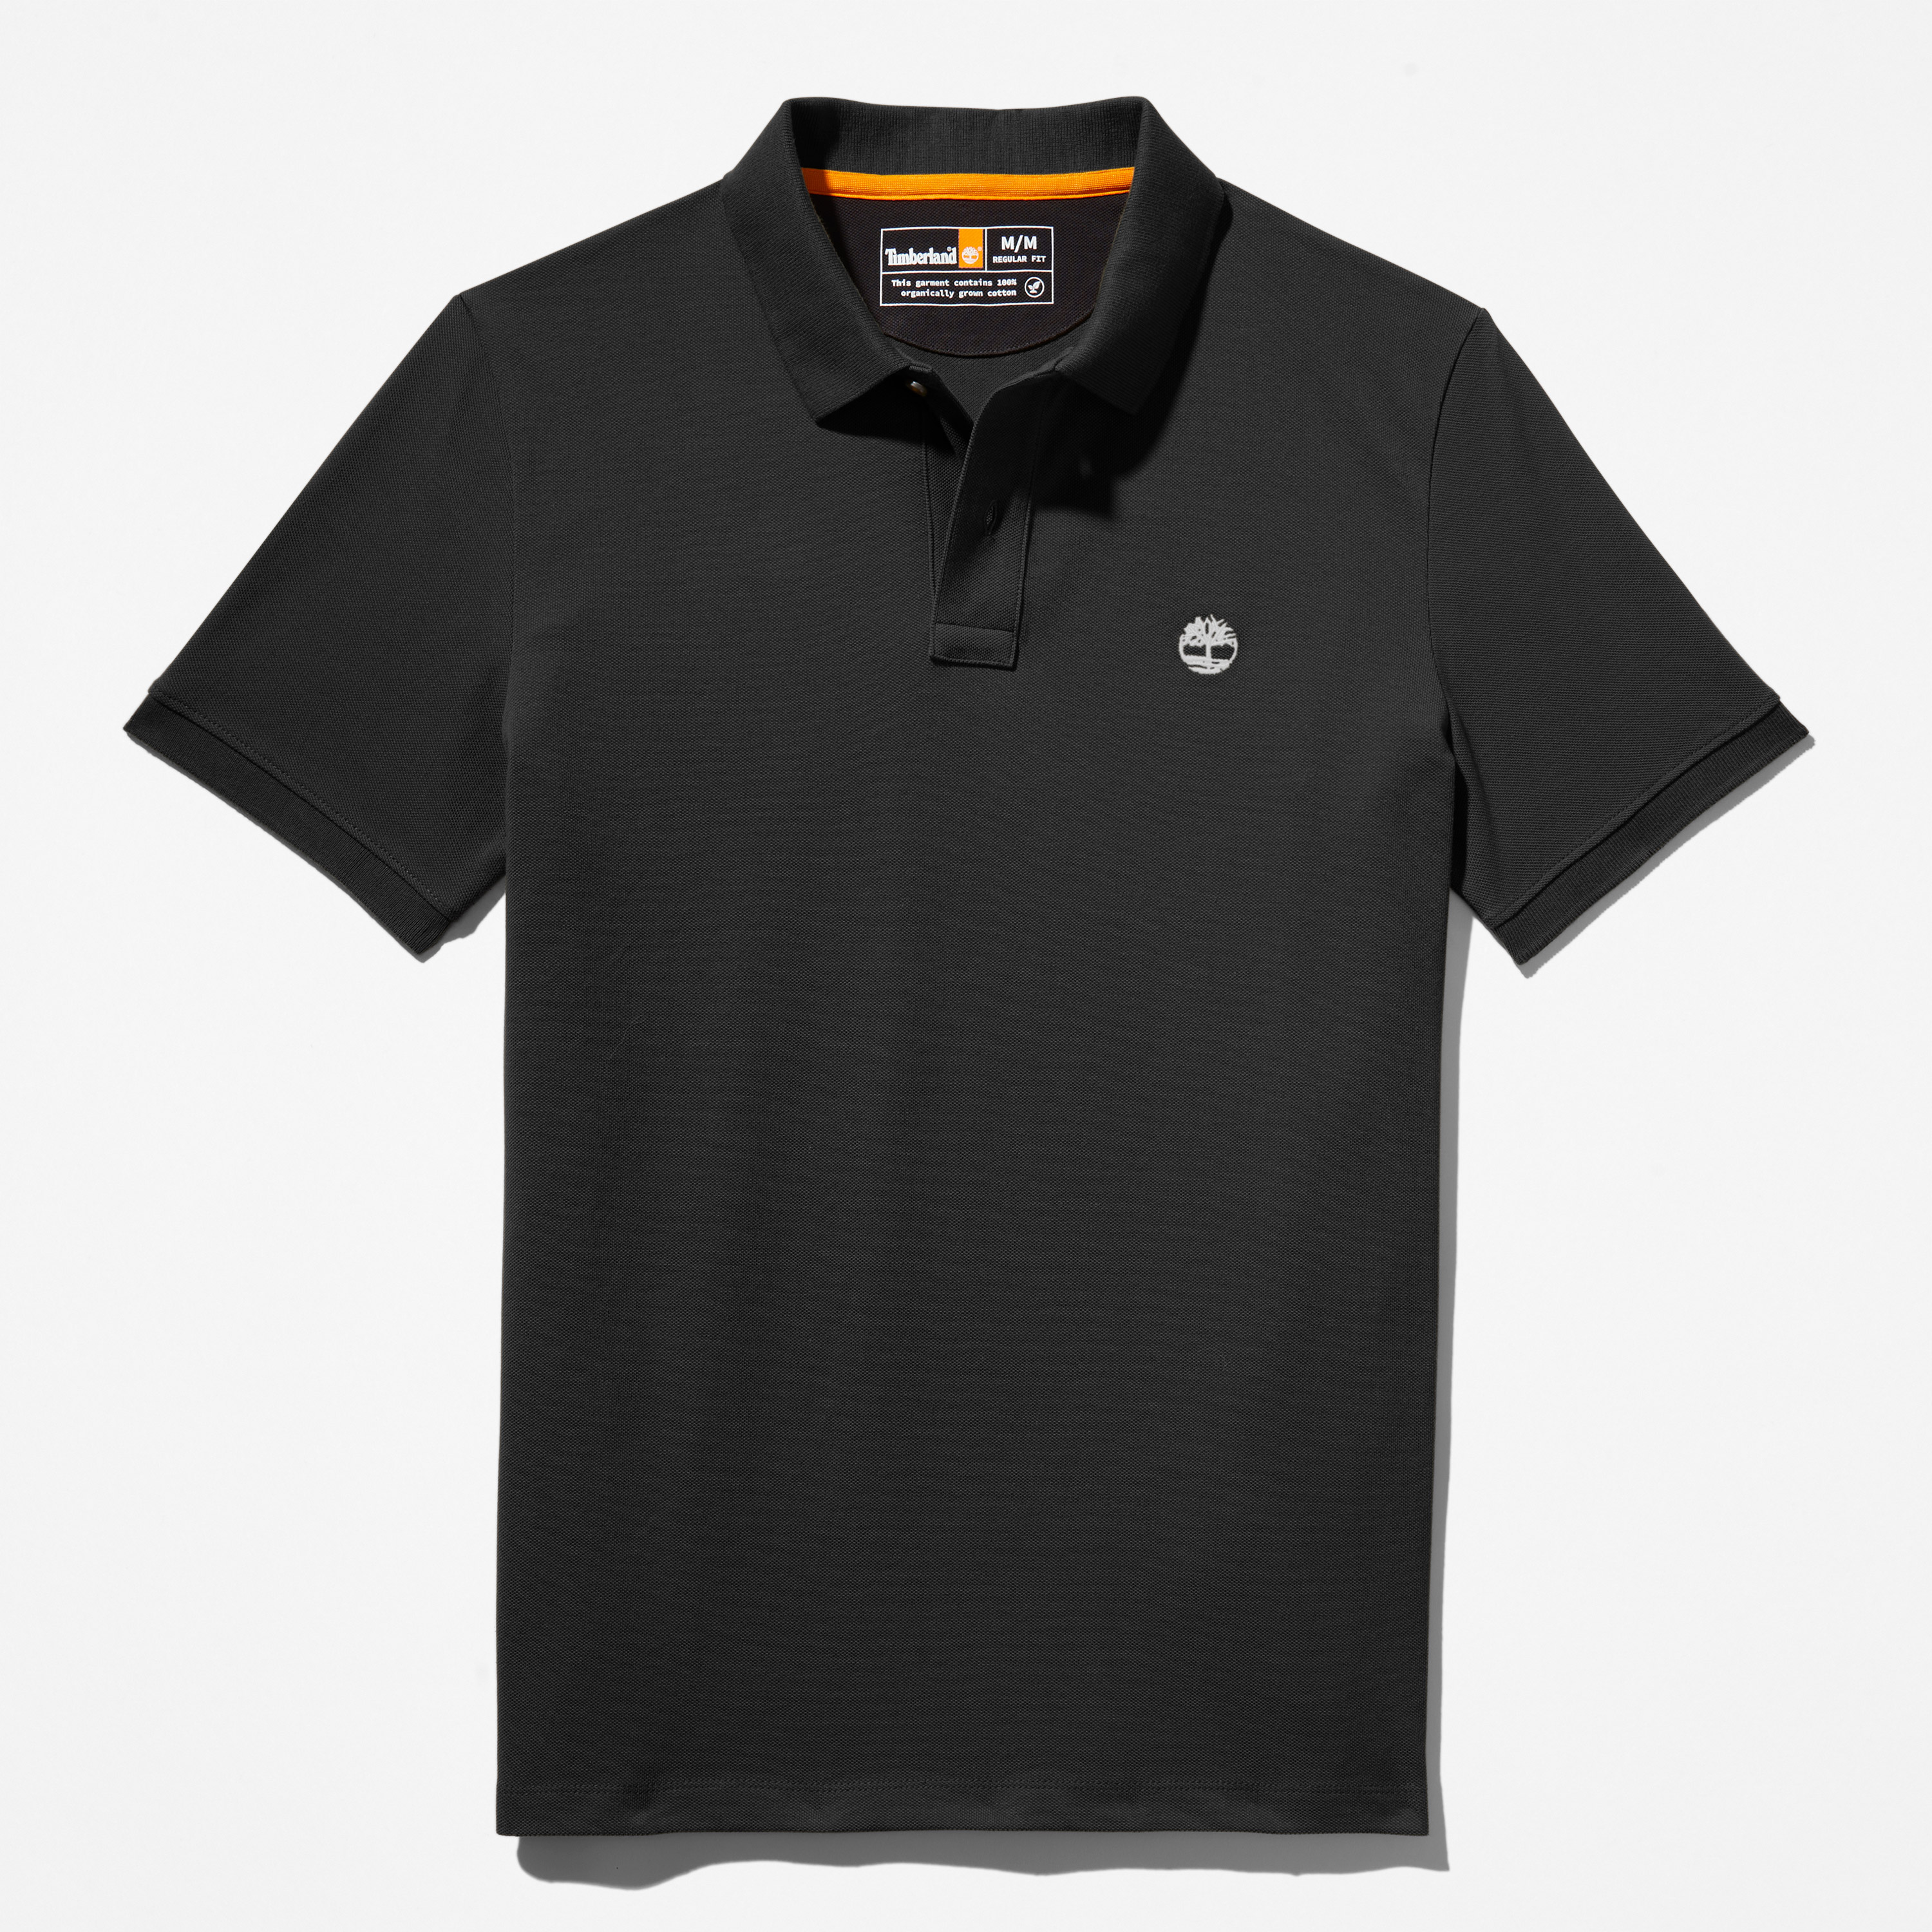 Men's Millers River Pique Polo Shirt - Timberland - Malaysia